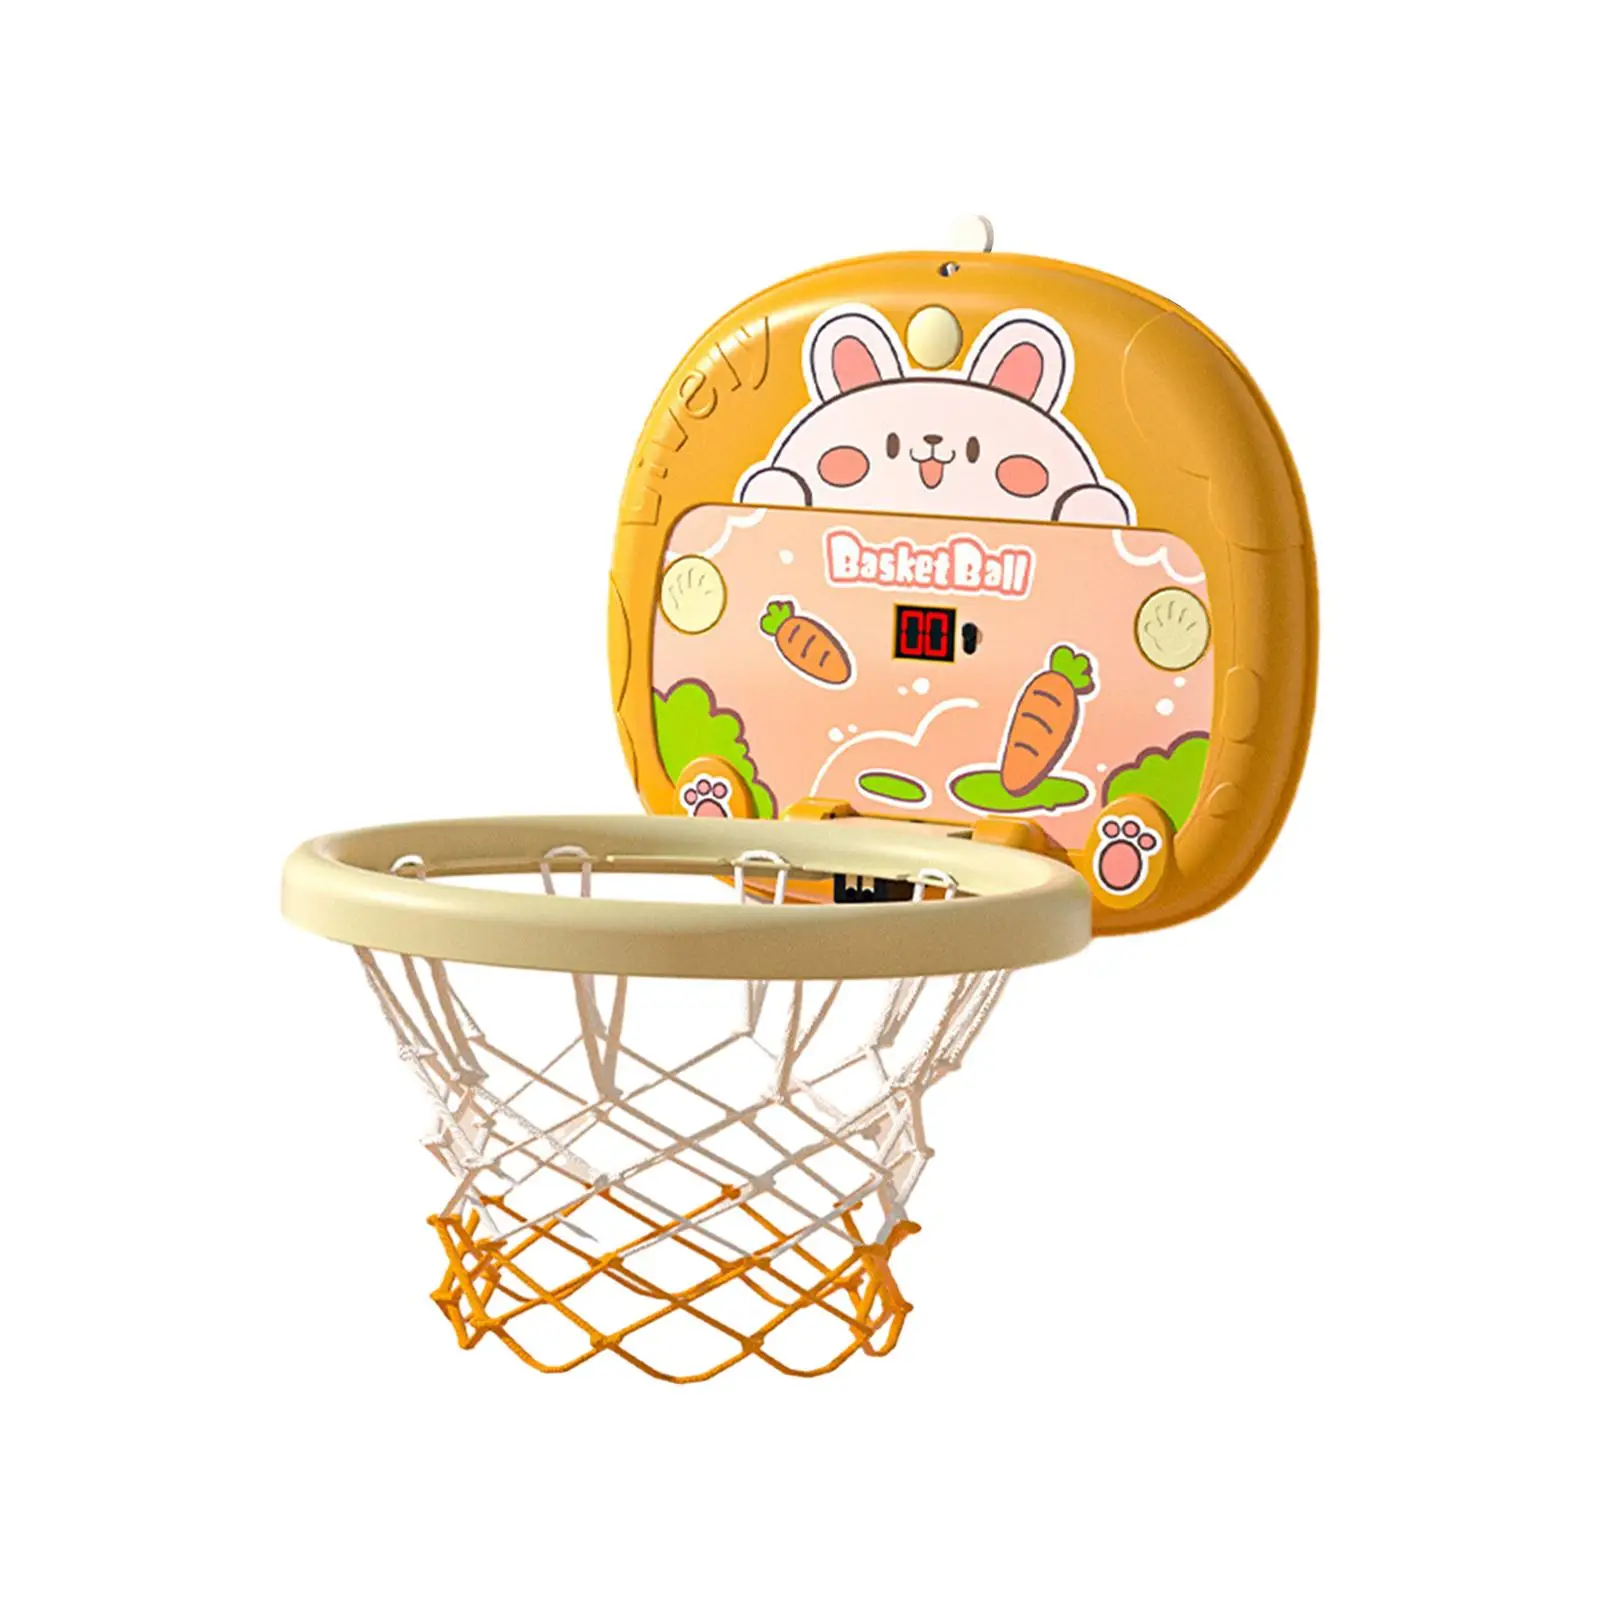 Indoor Mini Basketball Hoop Indoor and Outdoor Portable Basketball Toy Interactive Toys for Door Office Wall Home Adults Gifts